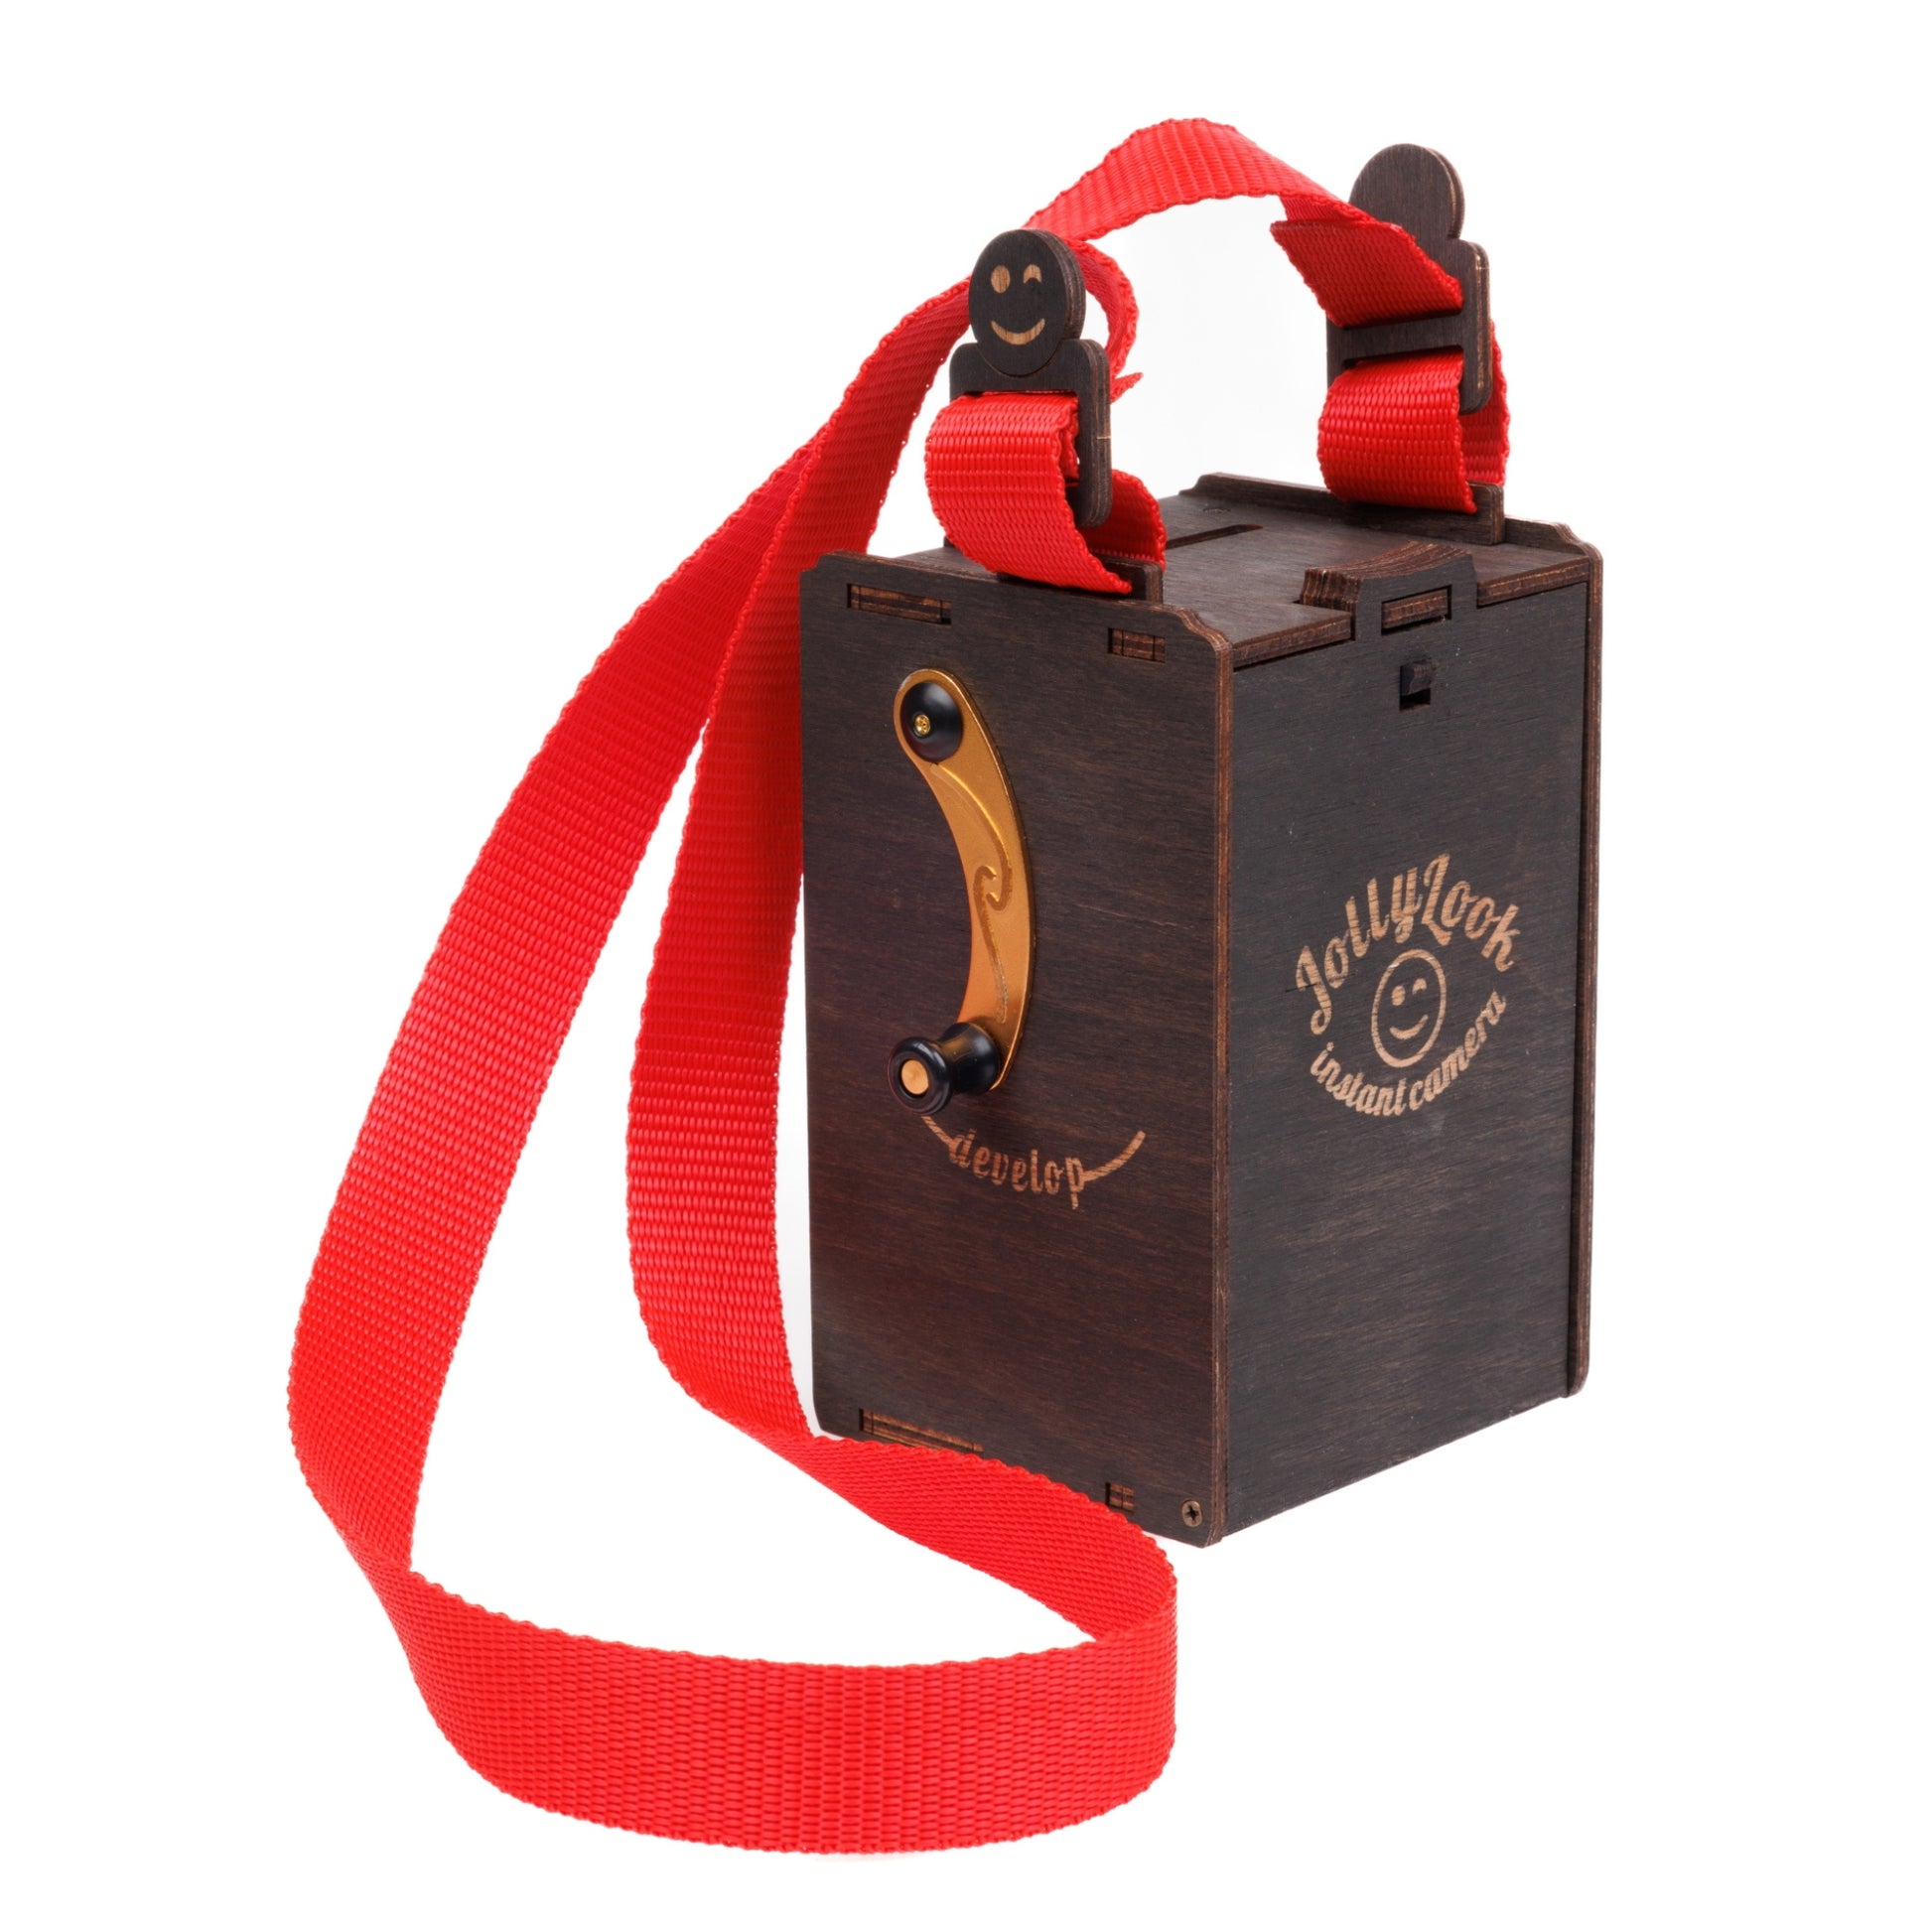 The red fabric neckstrap designed for Jollylook cameras, featuring a sturdy brown-stained lock, both components juxtaposed for securely carrying and utilizing the camera.